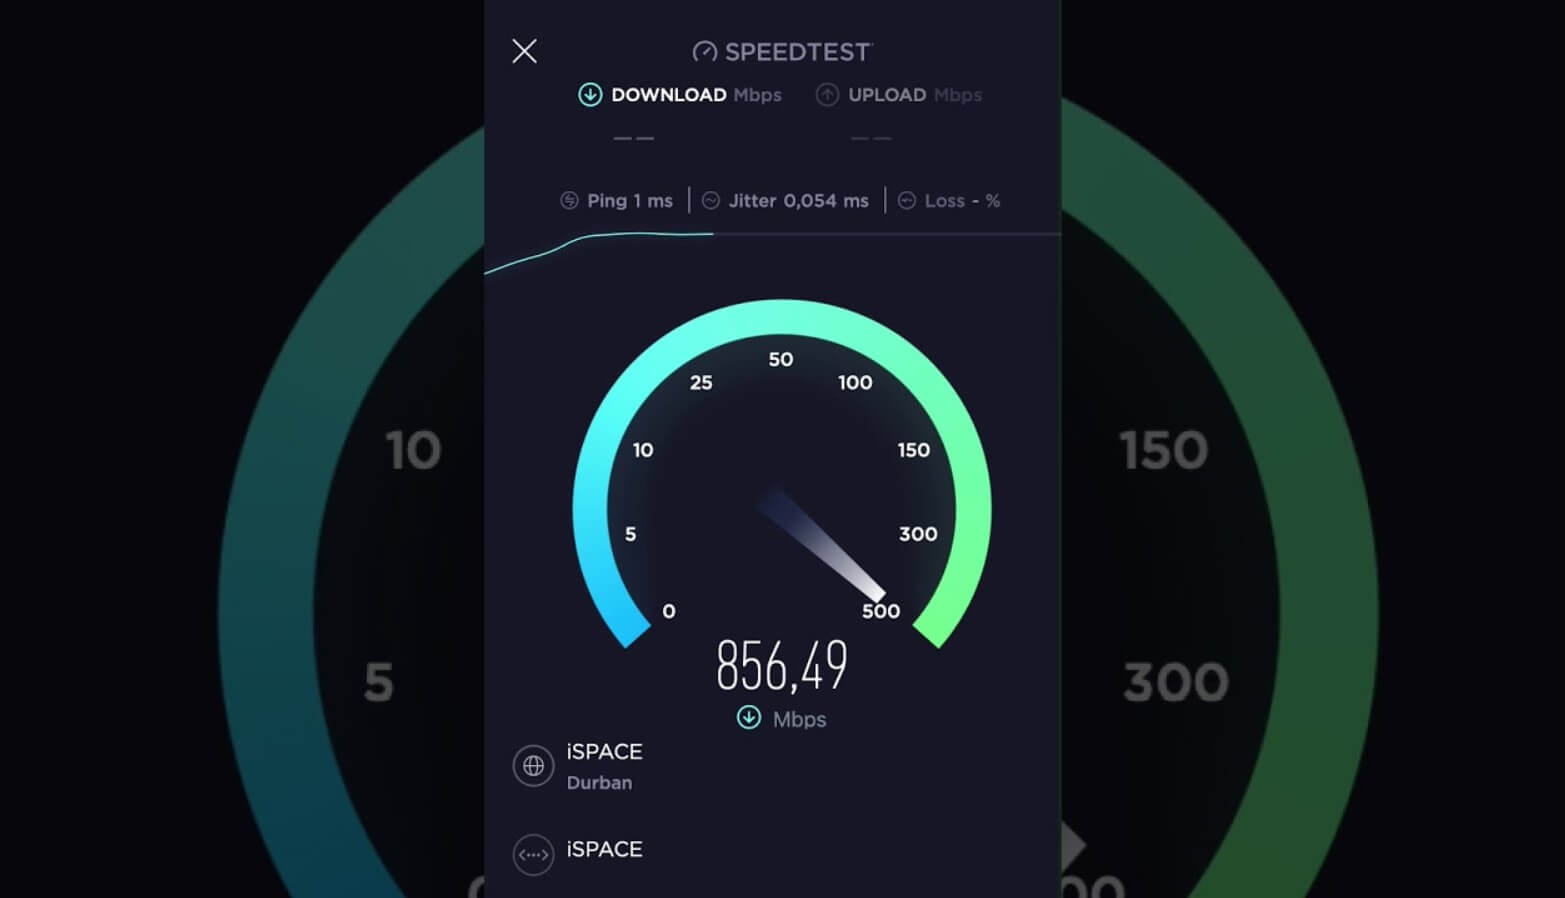 how to increase internet speed in mobile